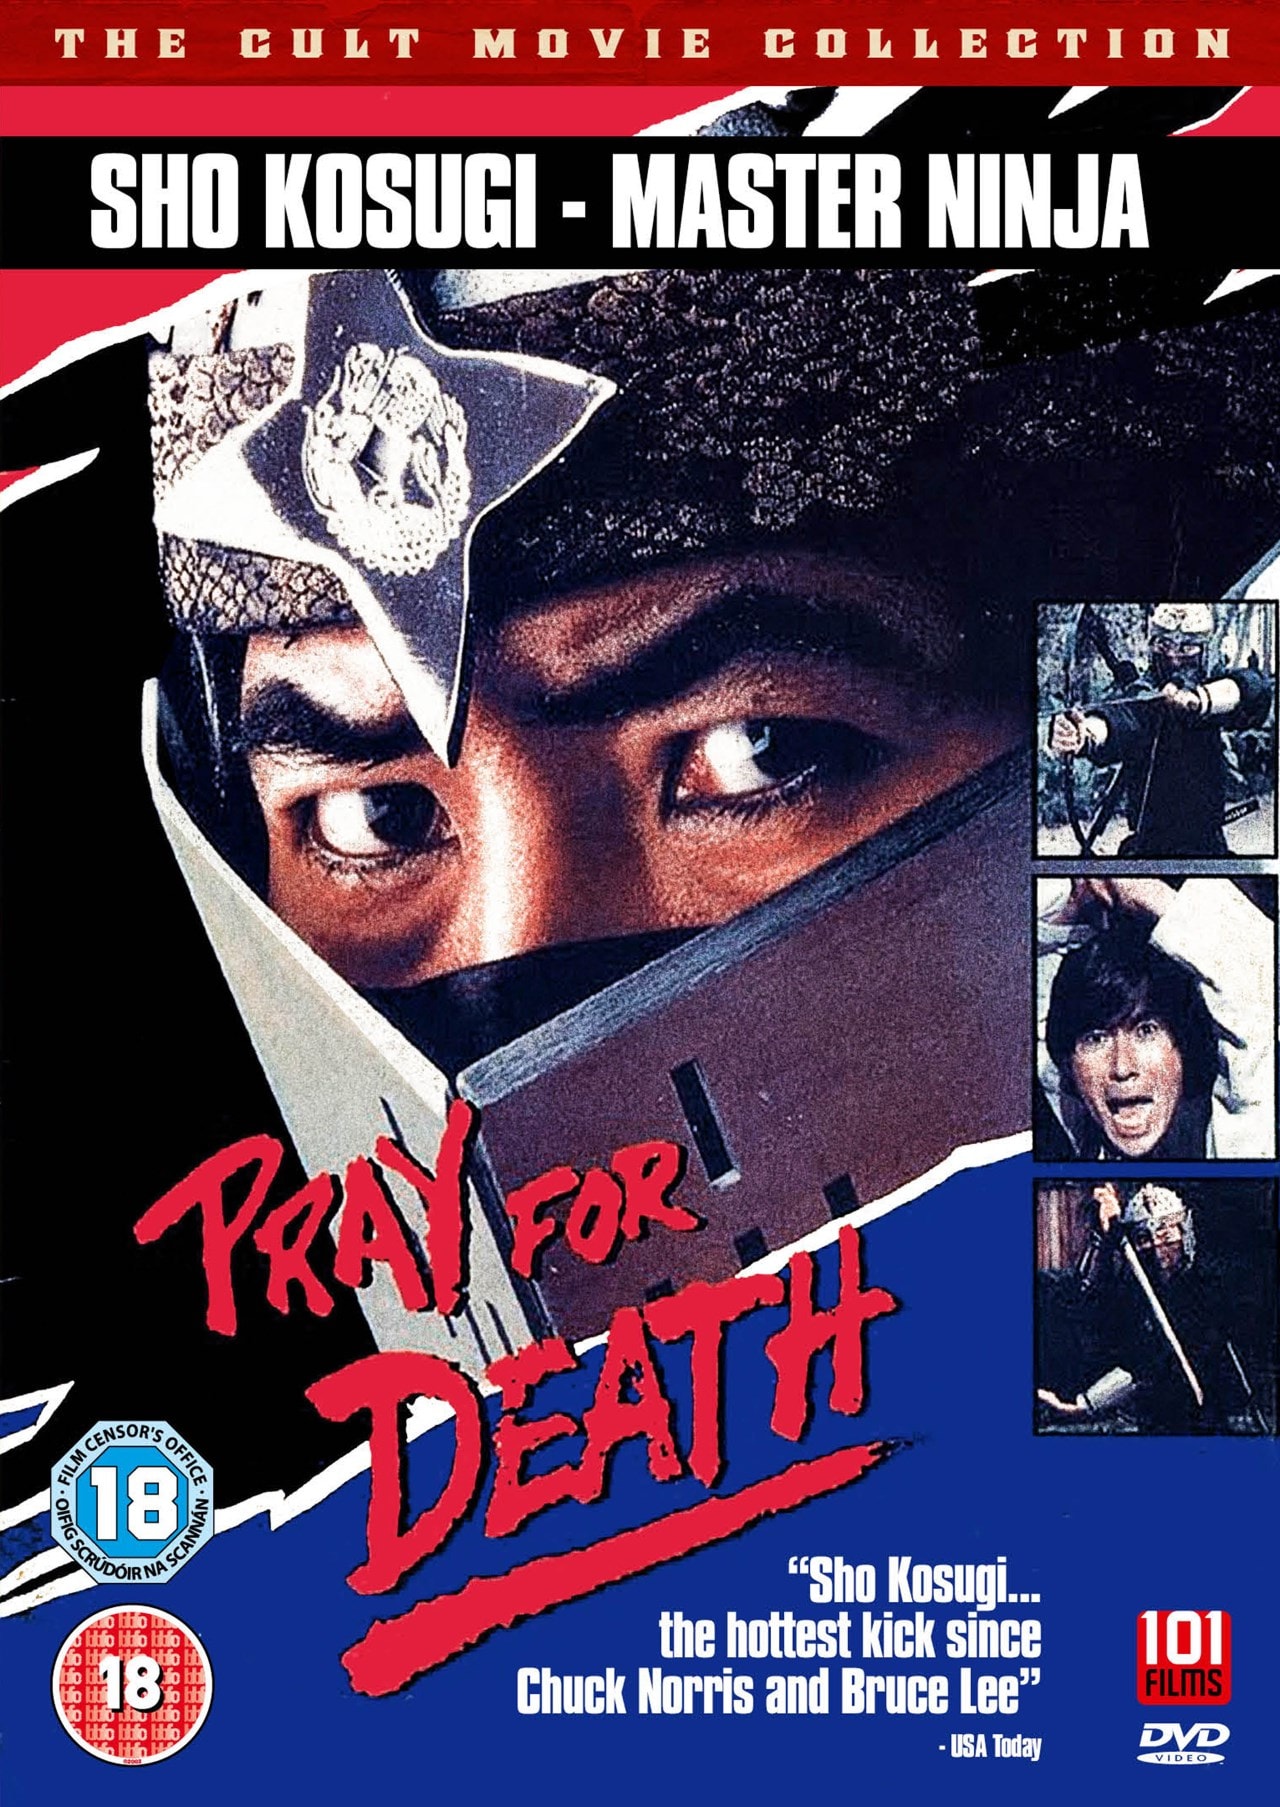 Pray for Death | DVD | Free shipping over £20 | HMV Store